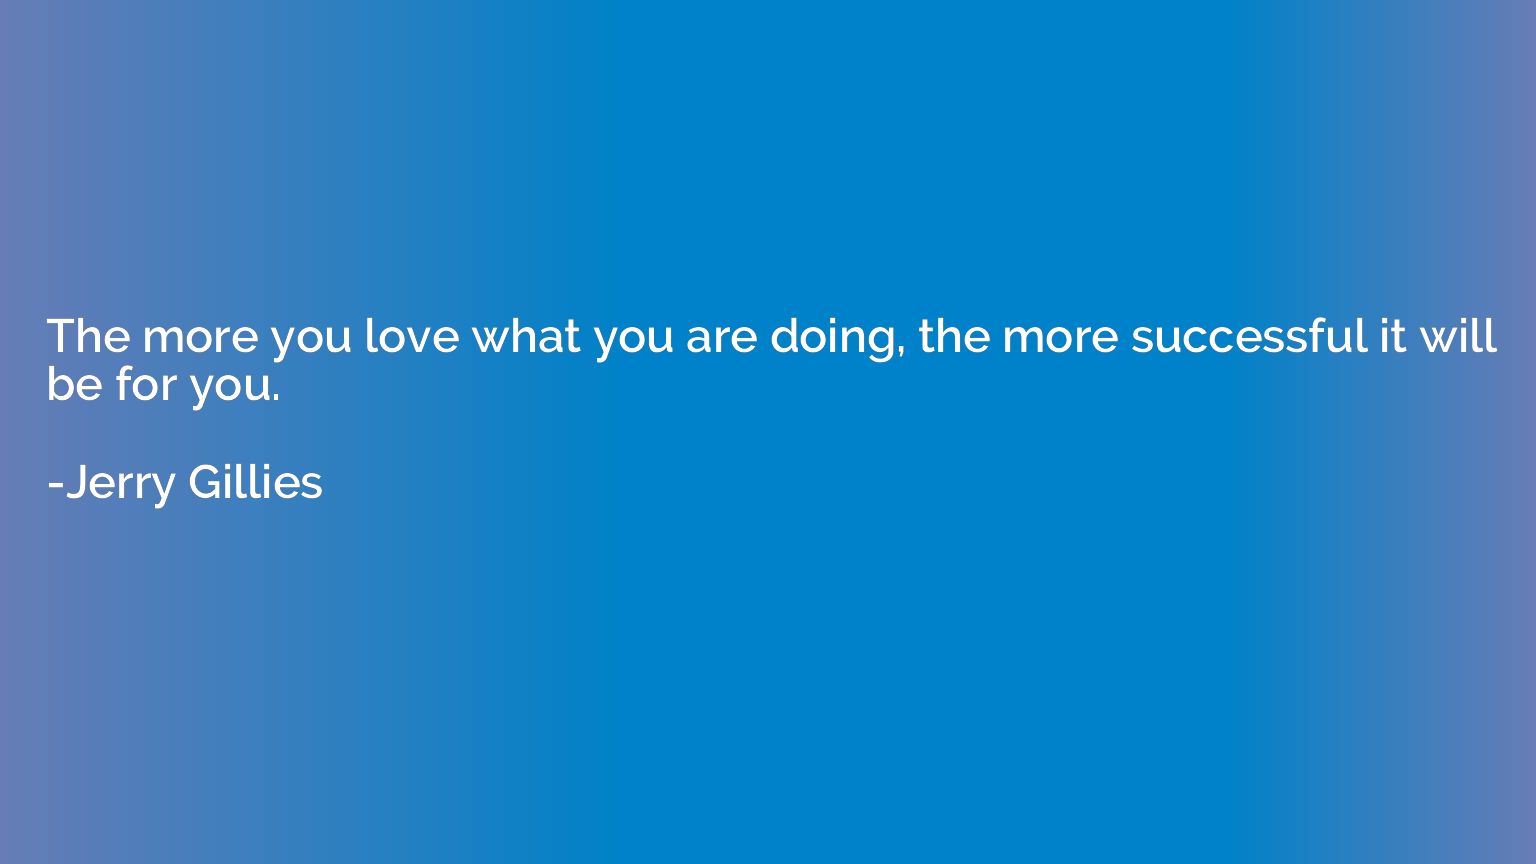 The more you love what you are doing, the more successful it